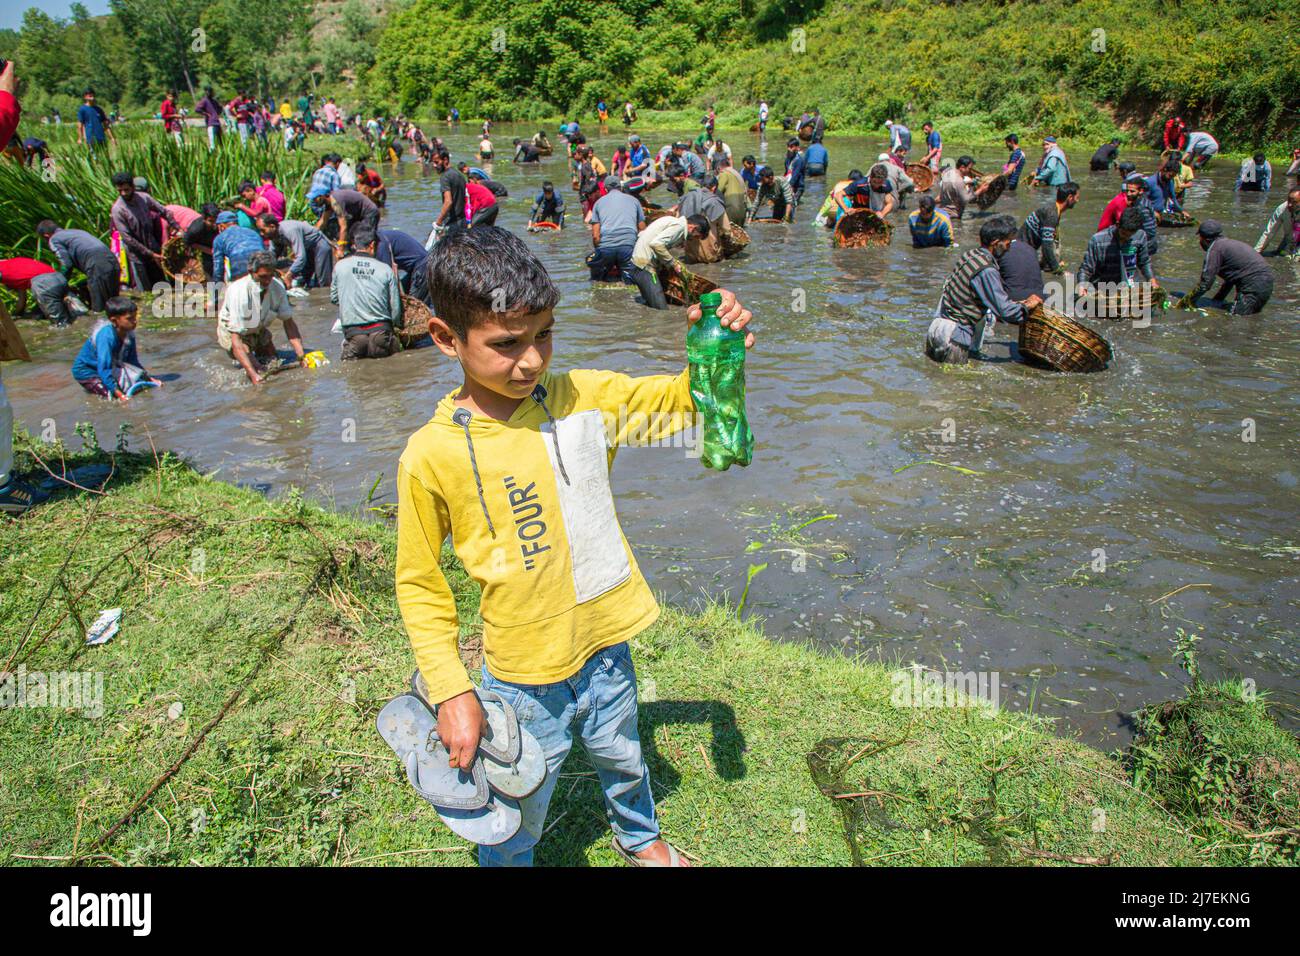 A boy shows off a bottle filled with fish as hundreds of Kashmiri